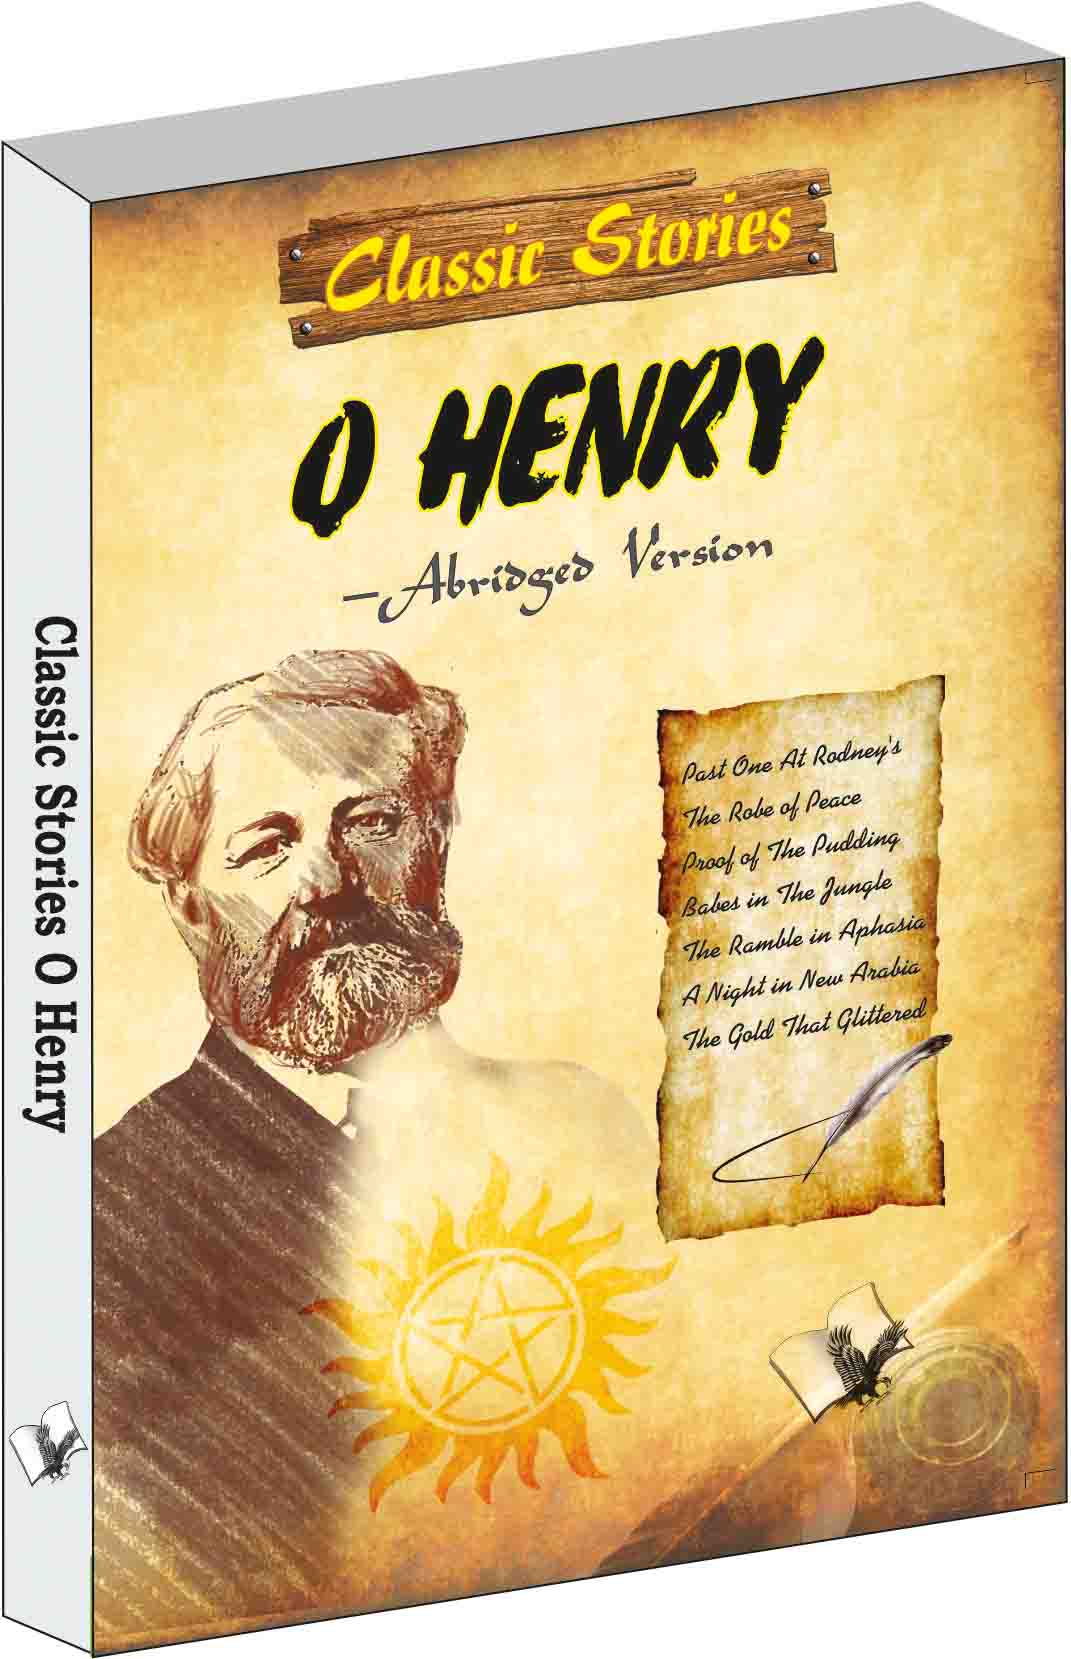 Classic Stories of O. Henry-Hand picked 9 popular stories out of 381